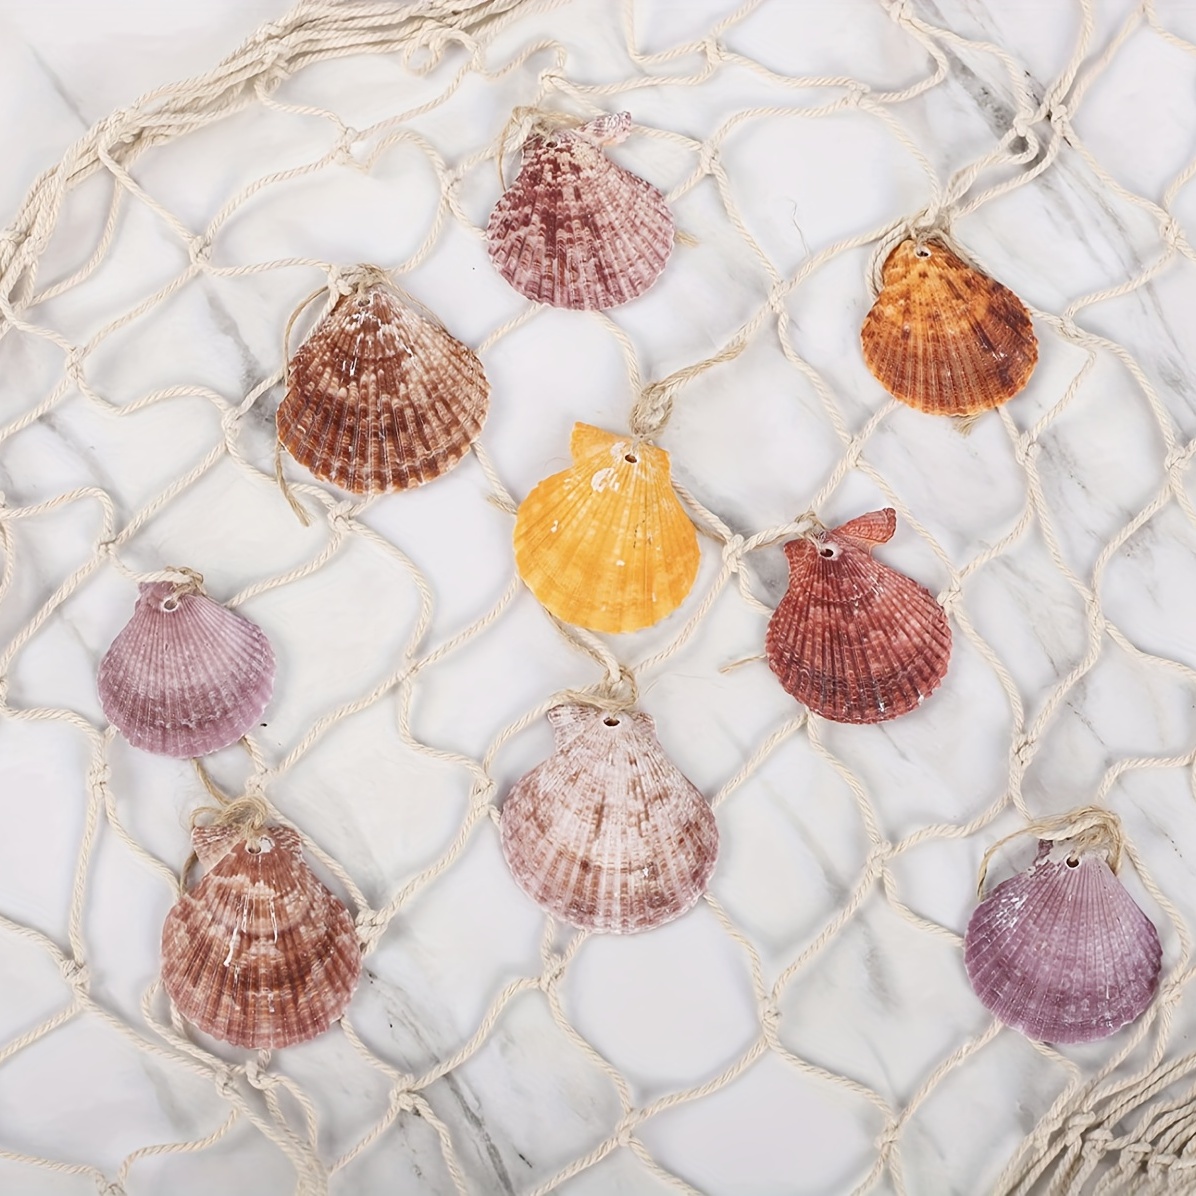 Decorative Fish Net 5 Ft X 10 Ft Knotted Use for Shell Displays